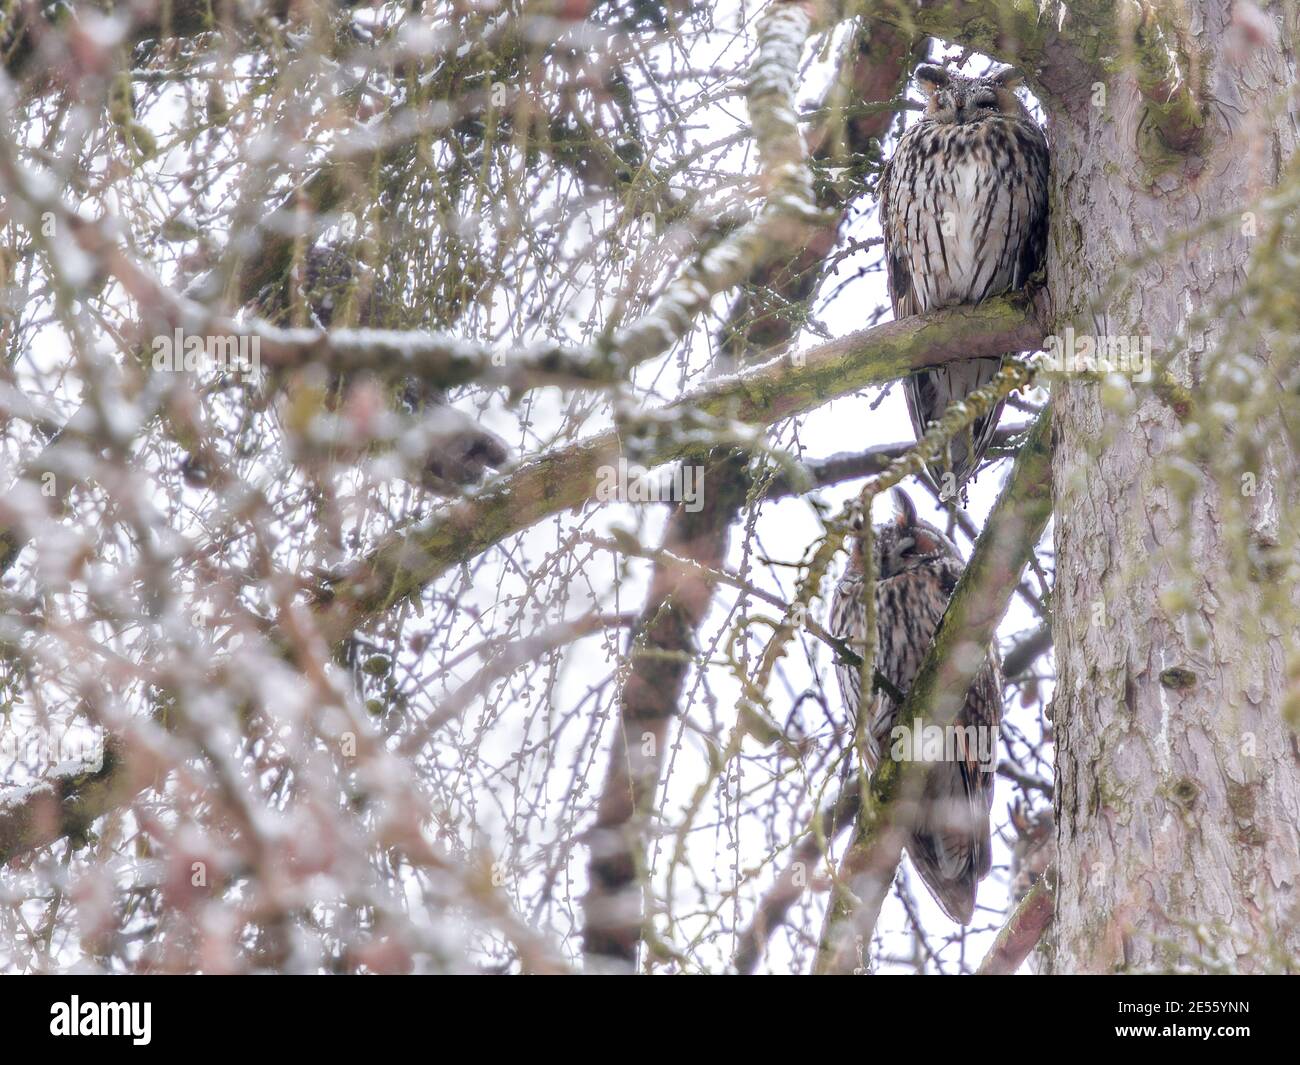 2 owls in a tree in winter Stock Photo